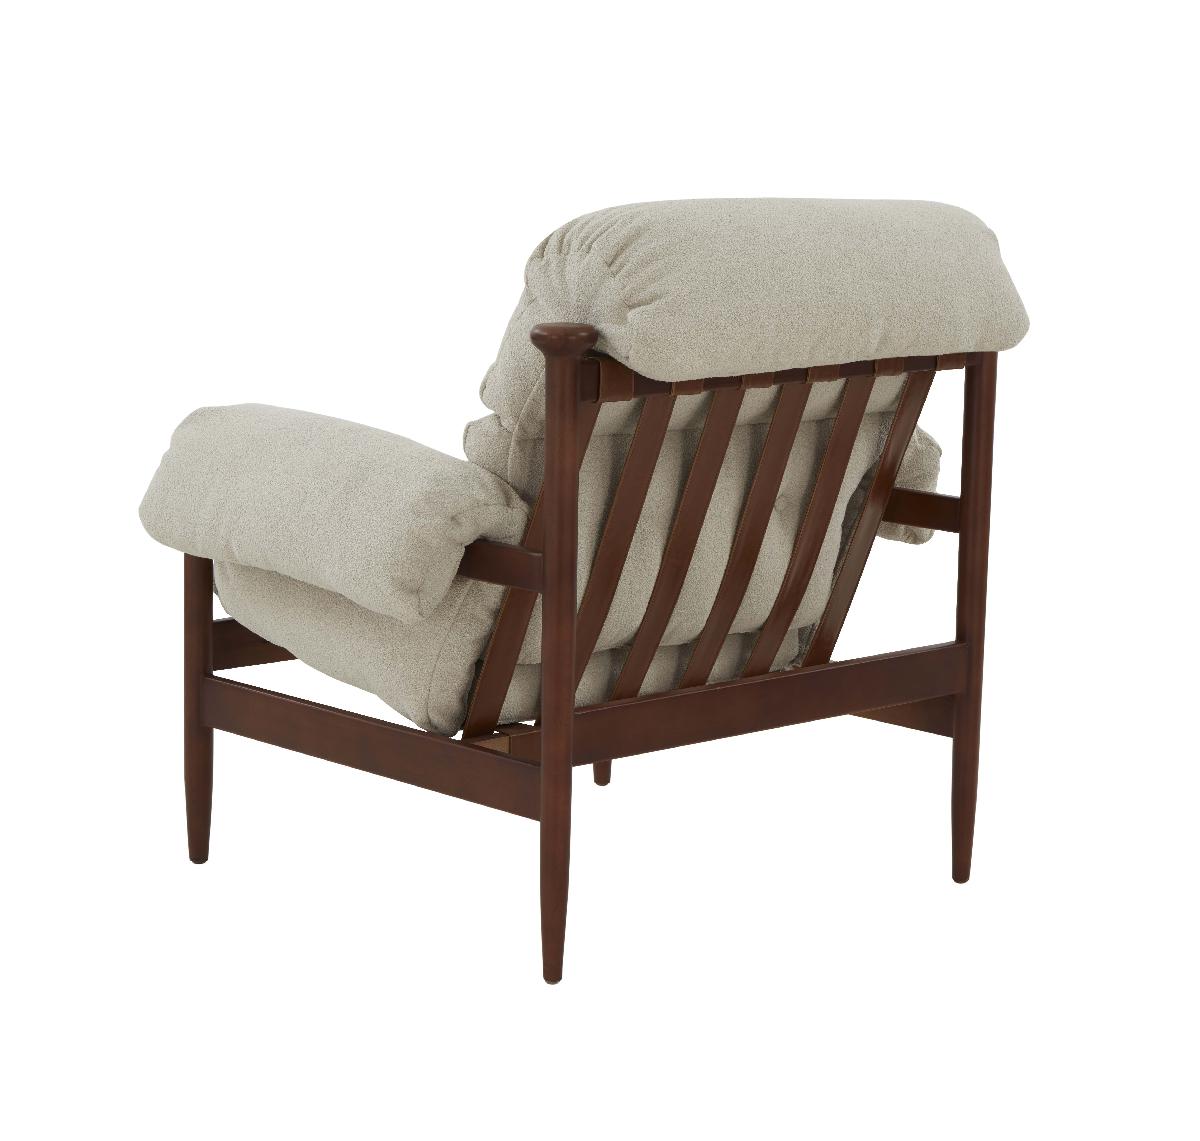 Safavieh Couture Blakeson Wood Frame Accent Chair - Taupe / Dark Brown